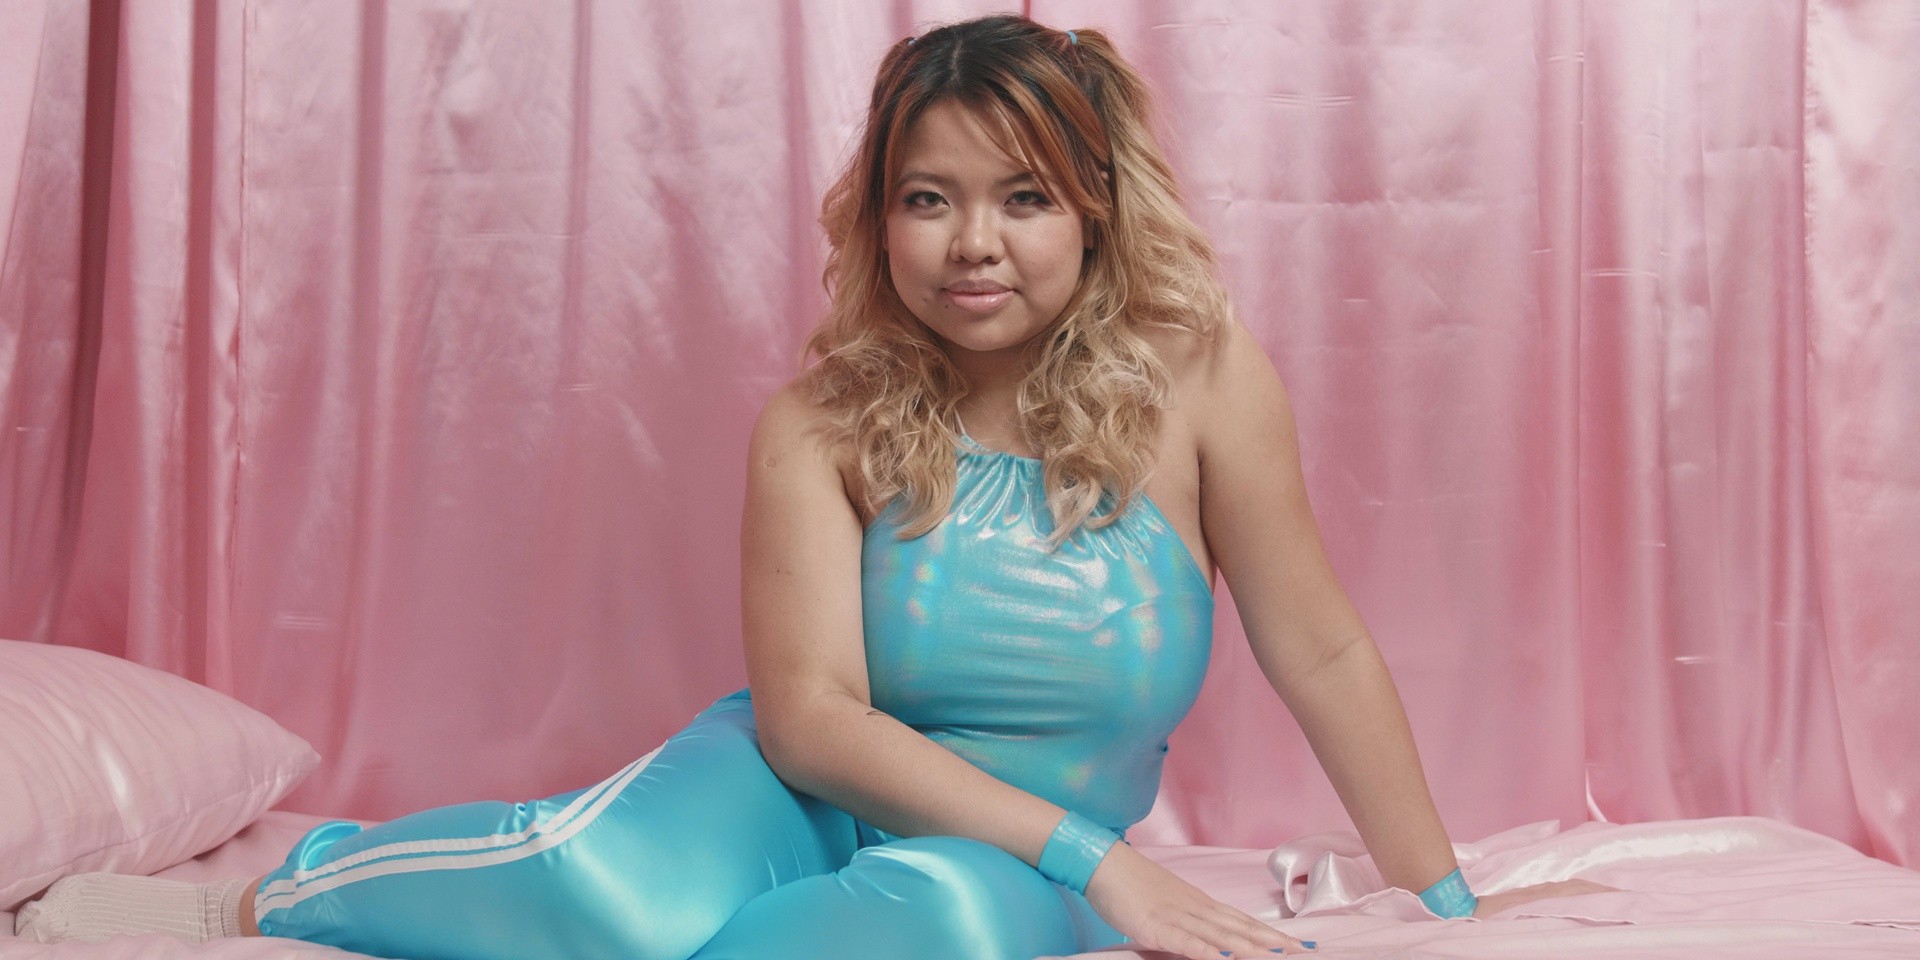 PREMIERE: Ysa Yaneza's video for 'IRL (If You Really See Me)' is a pastel delight with a deeper message – watch